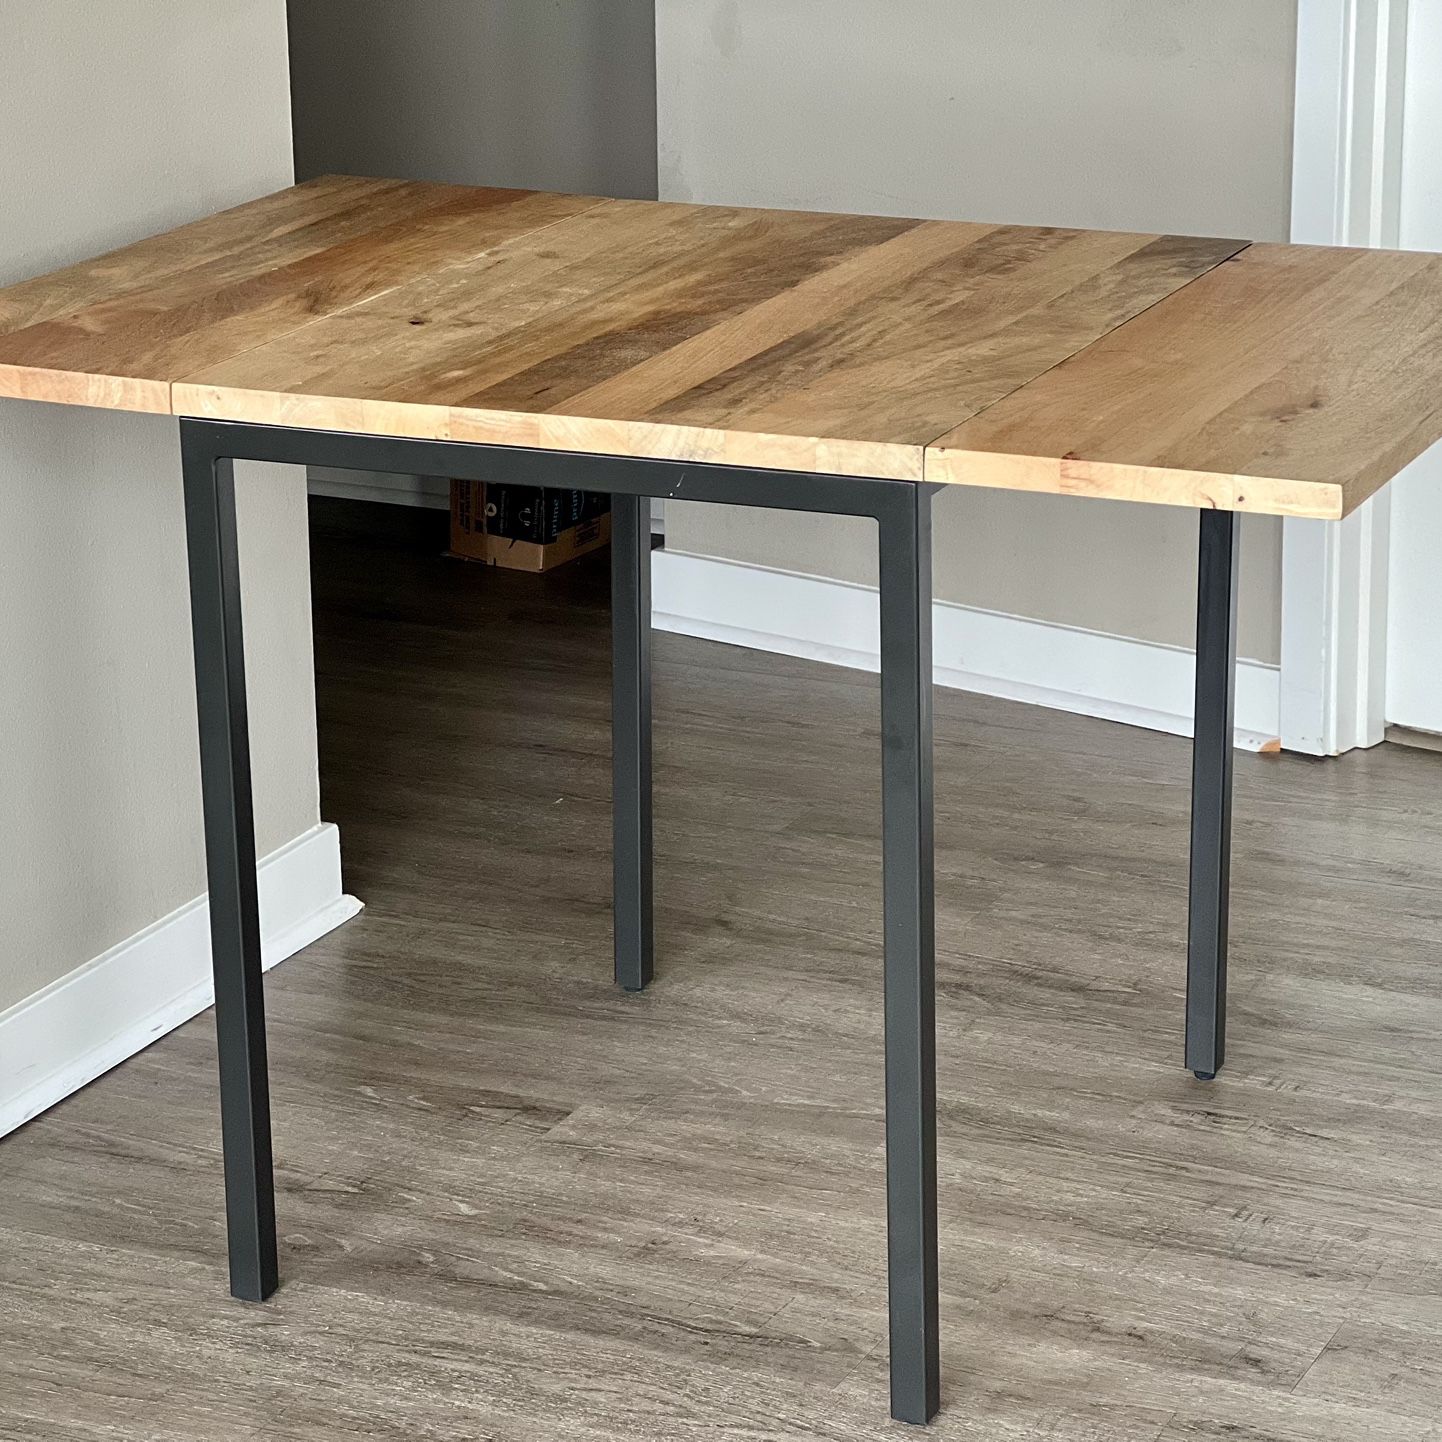 West Elm expandable dining table, CONTRACT GRADE